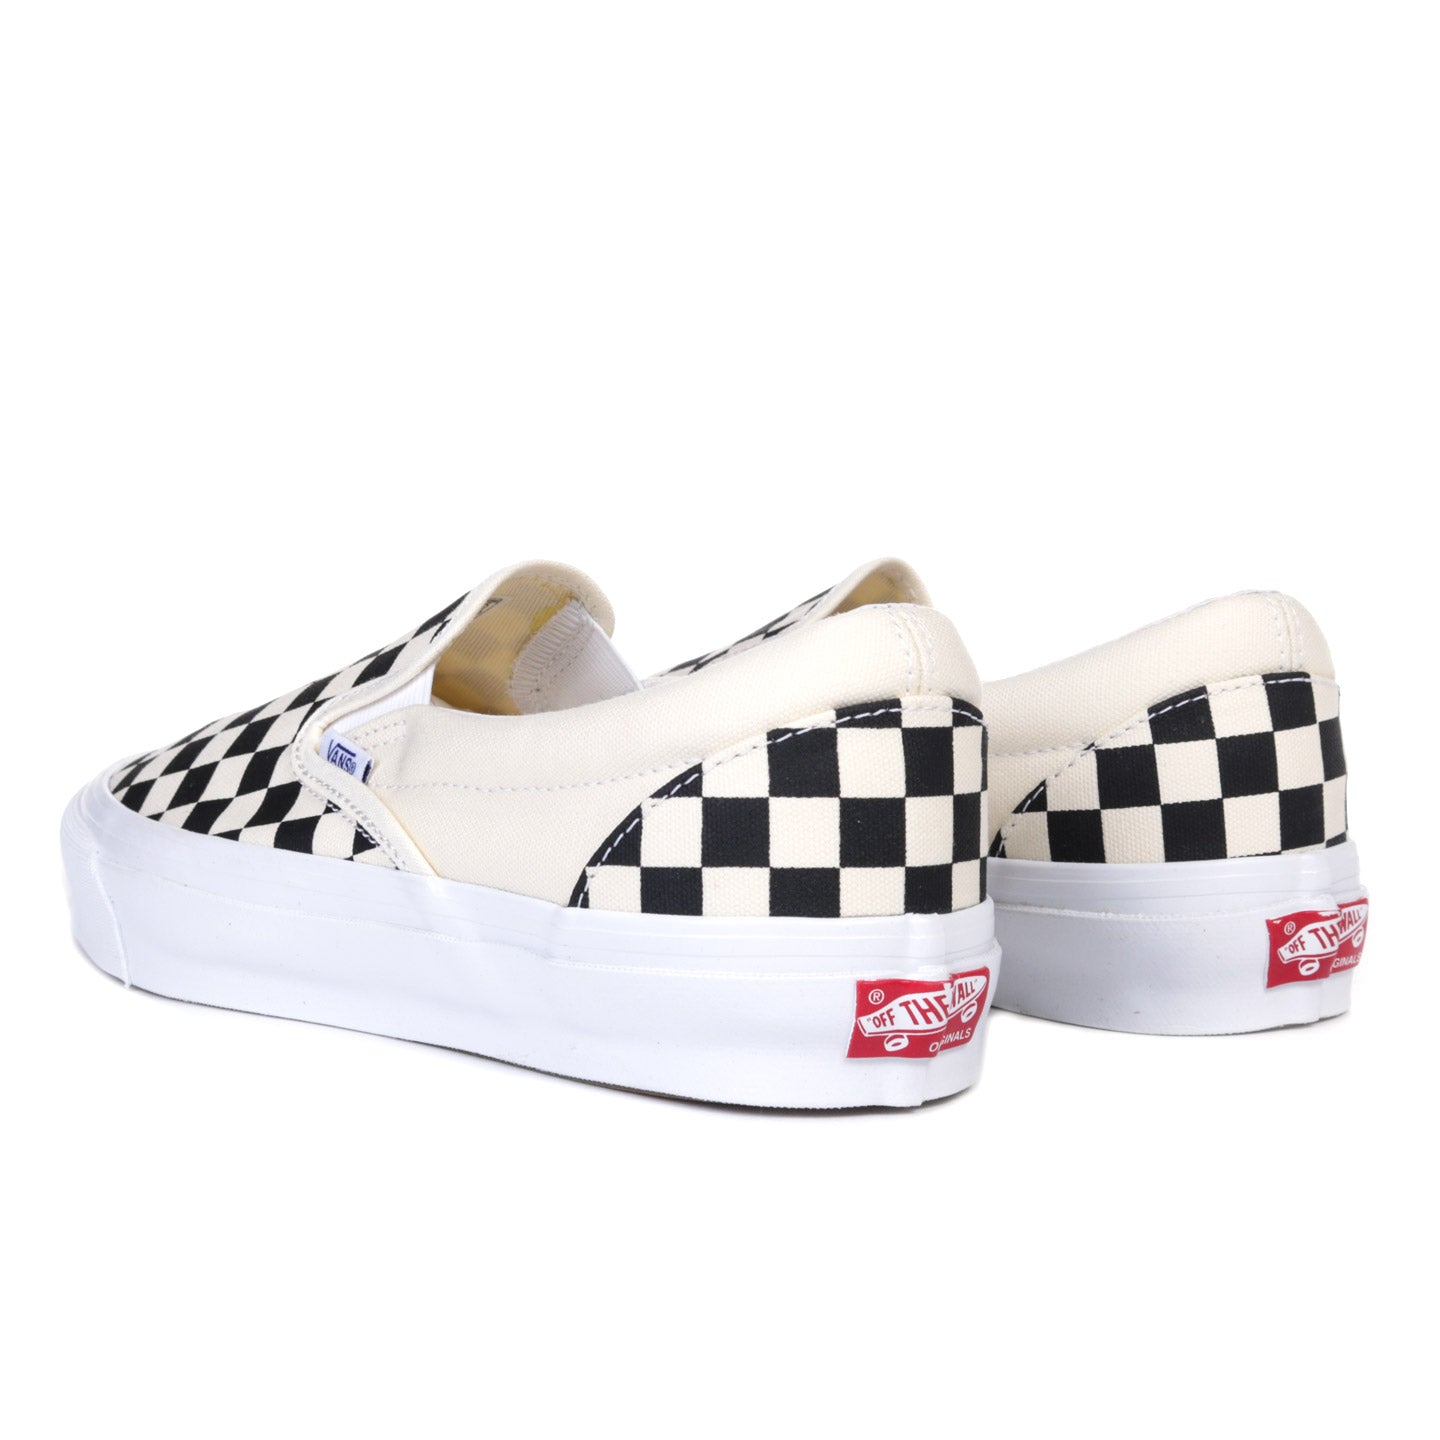 VAULT BY VANS OG CLASSIC SLIP-ON LX CANVAS CHECKERBOARD